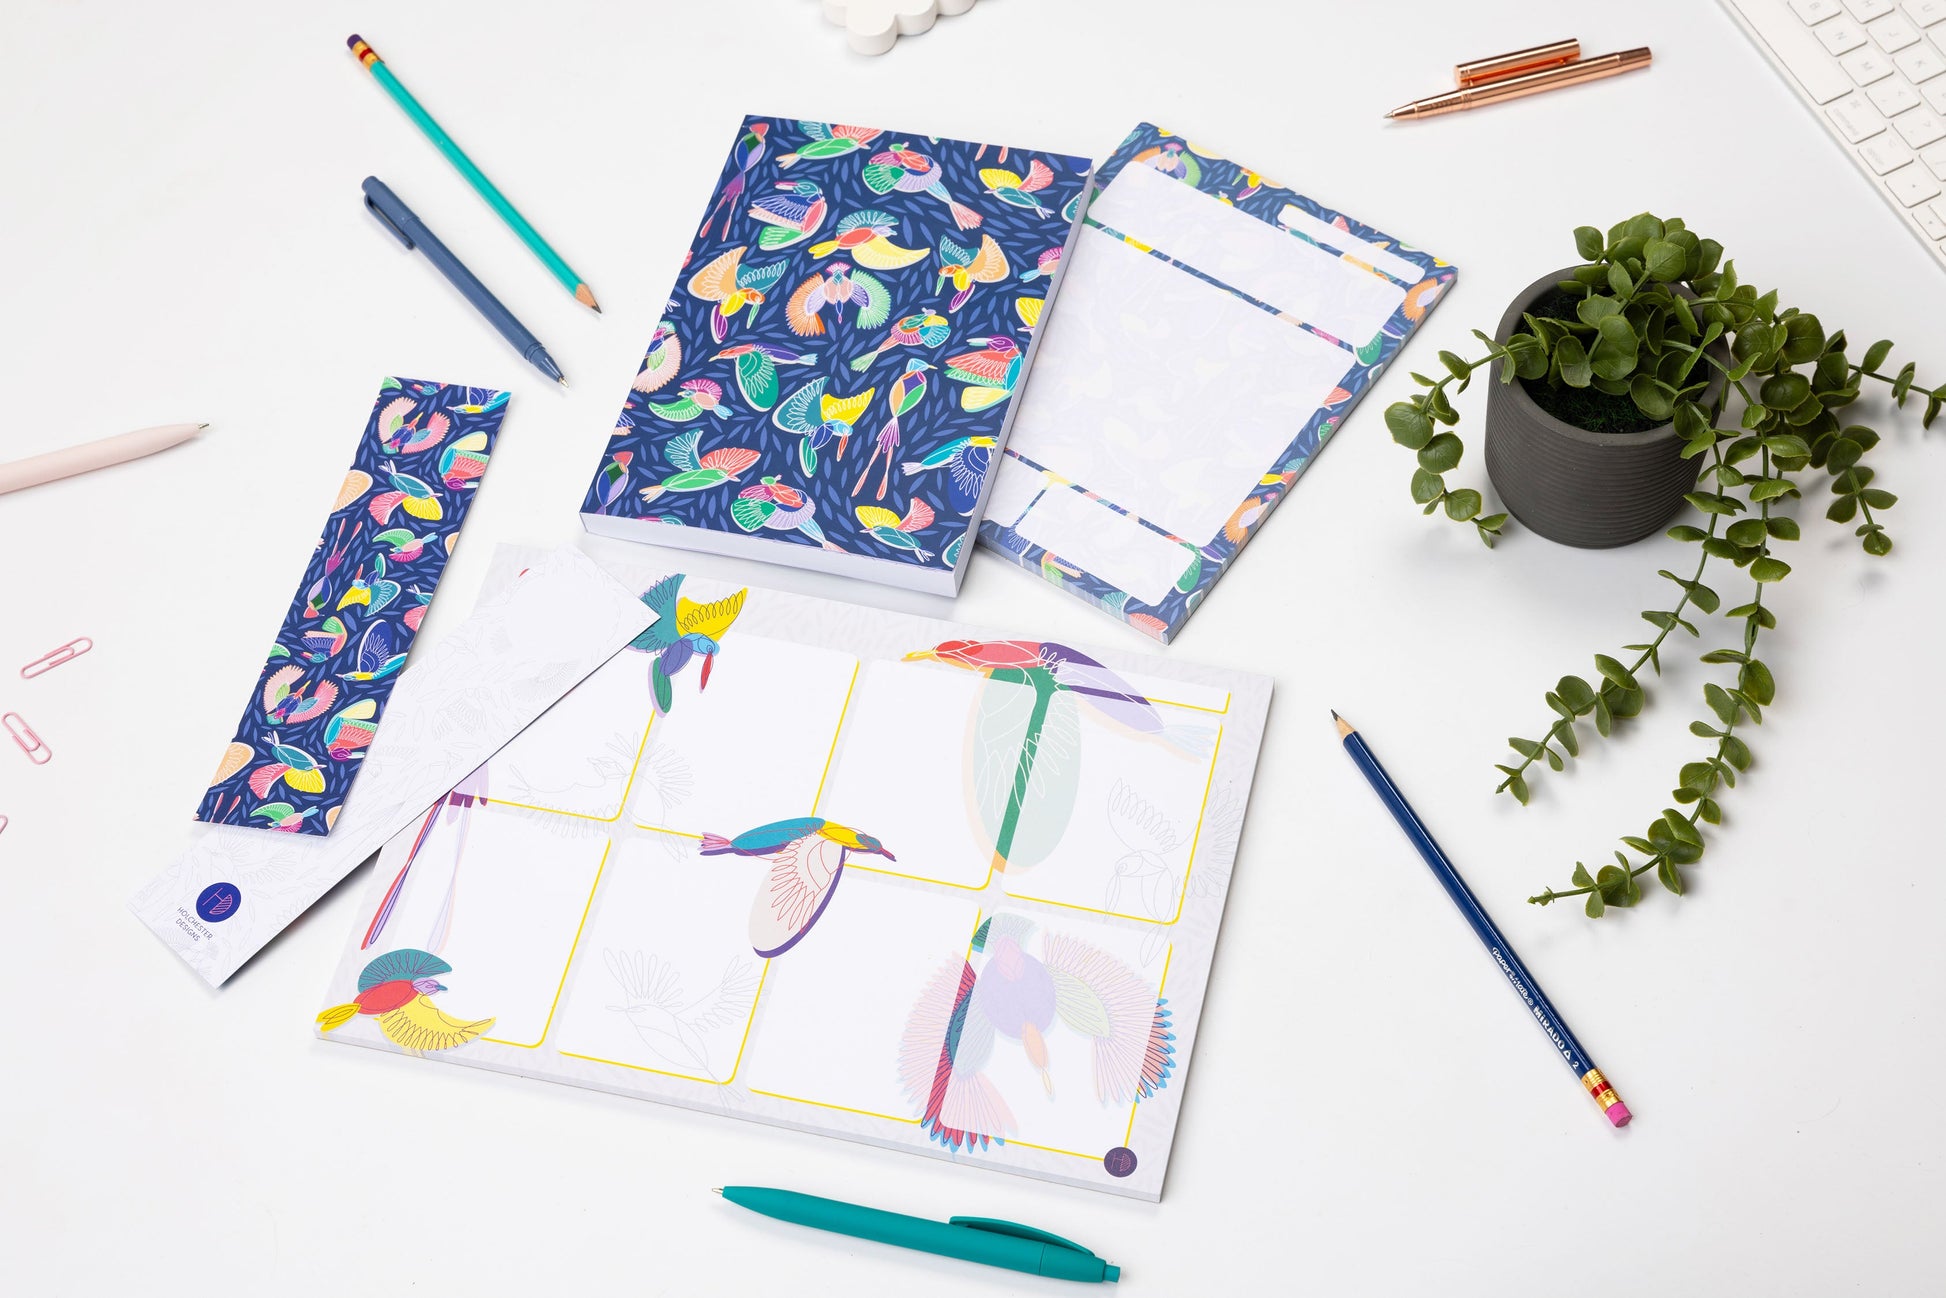 The Full Paradise collection - A4 Planner pad, A5 notebook, A5 Daily Planner Pad and 2 Double-side bookmarks (one side each) - are lying on a white desk surrounded by pens, paperclips and a small plant. 